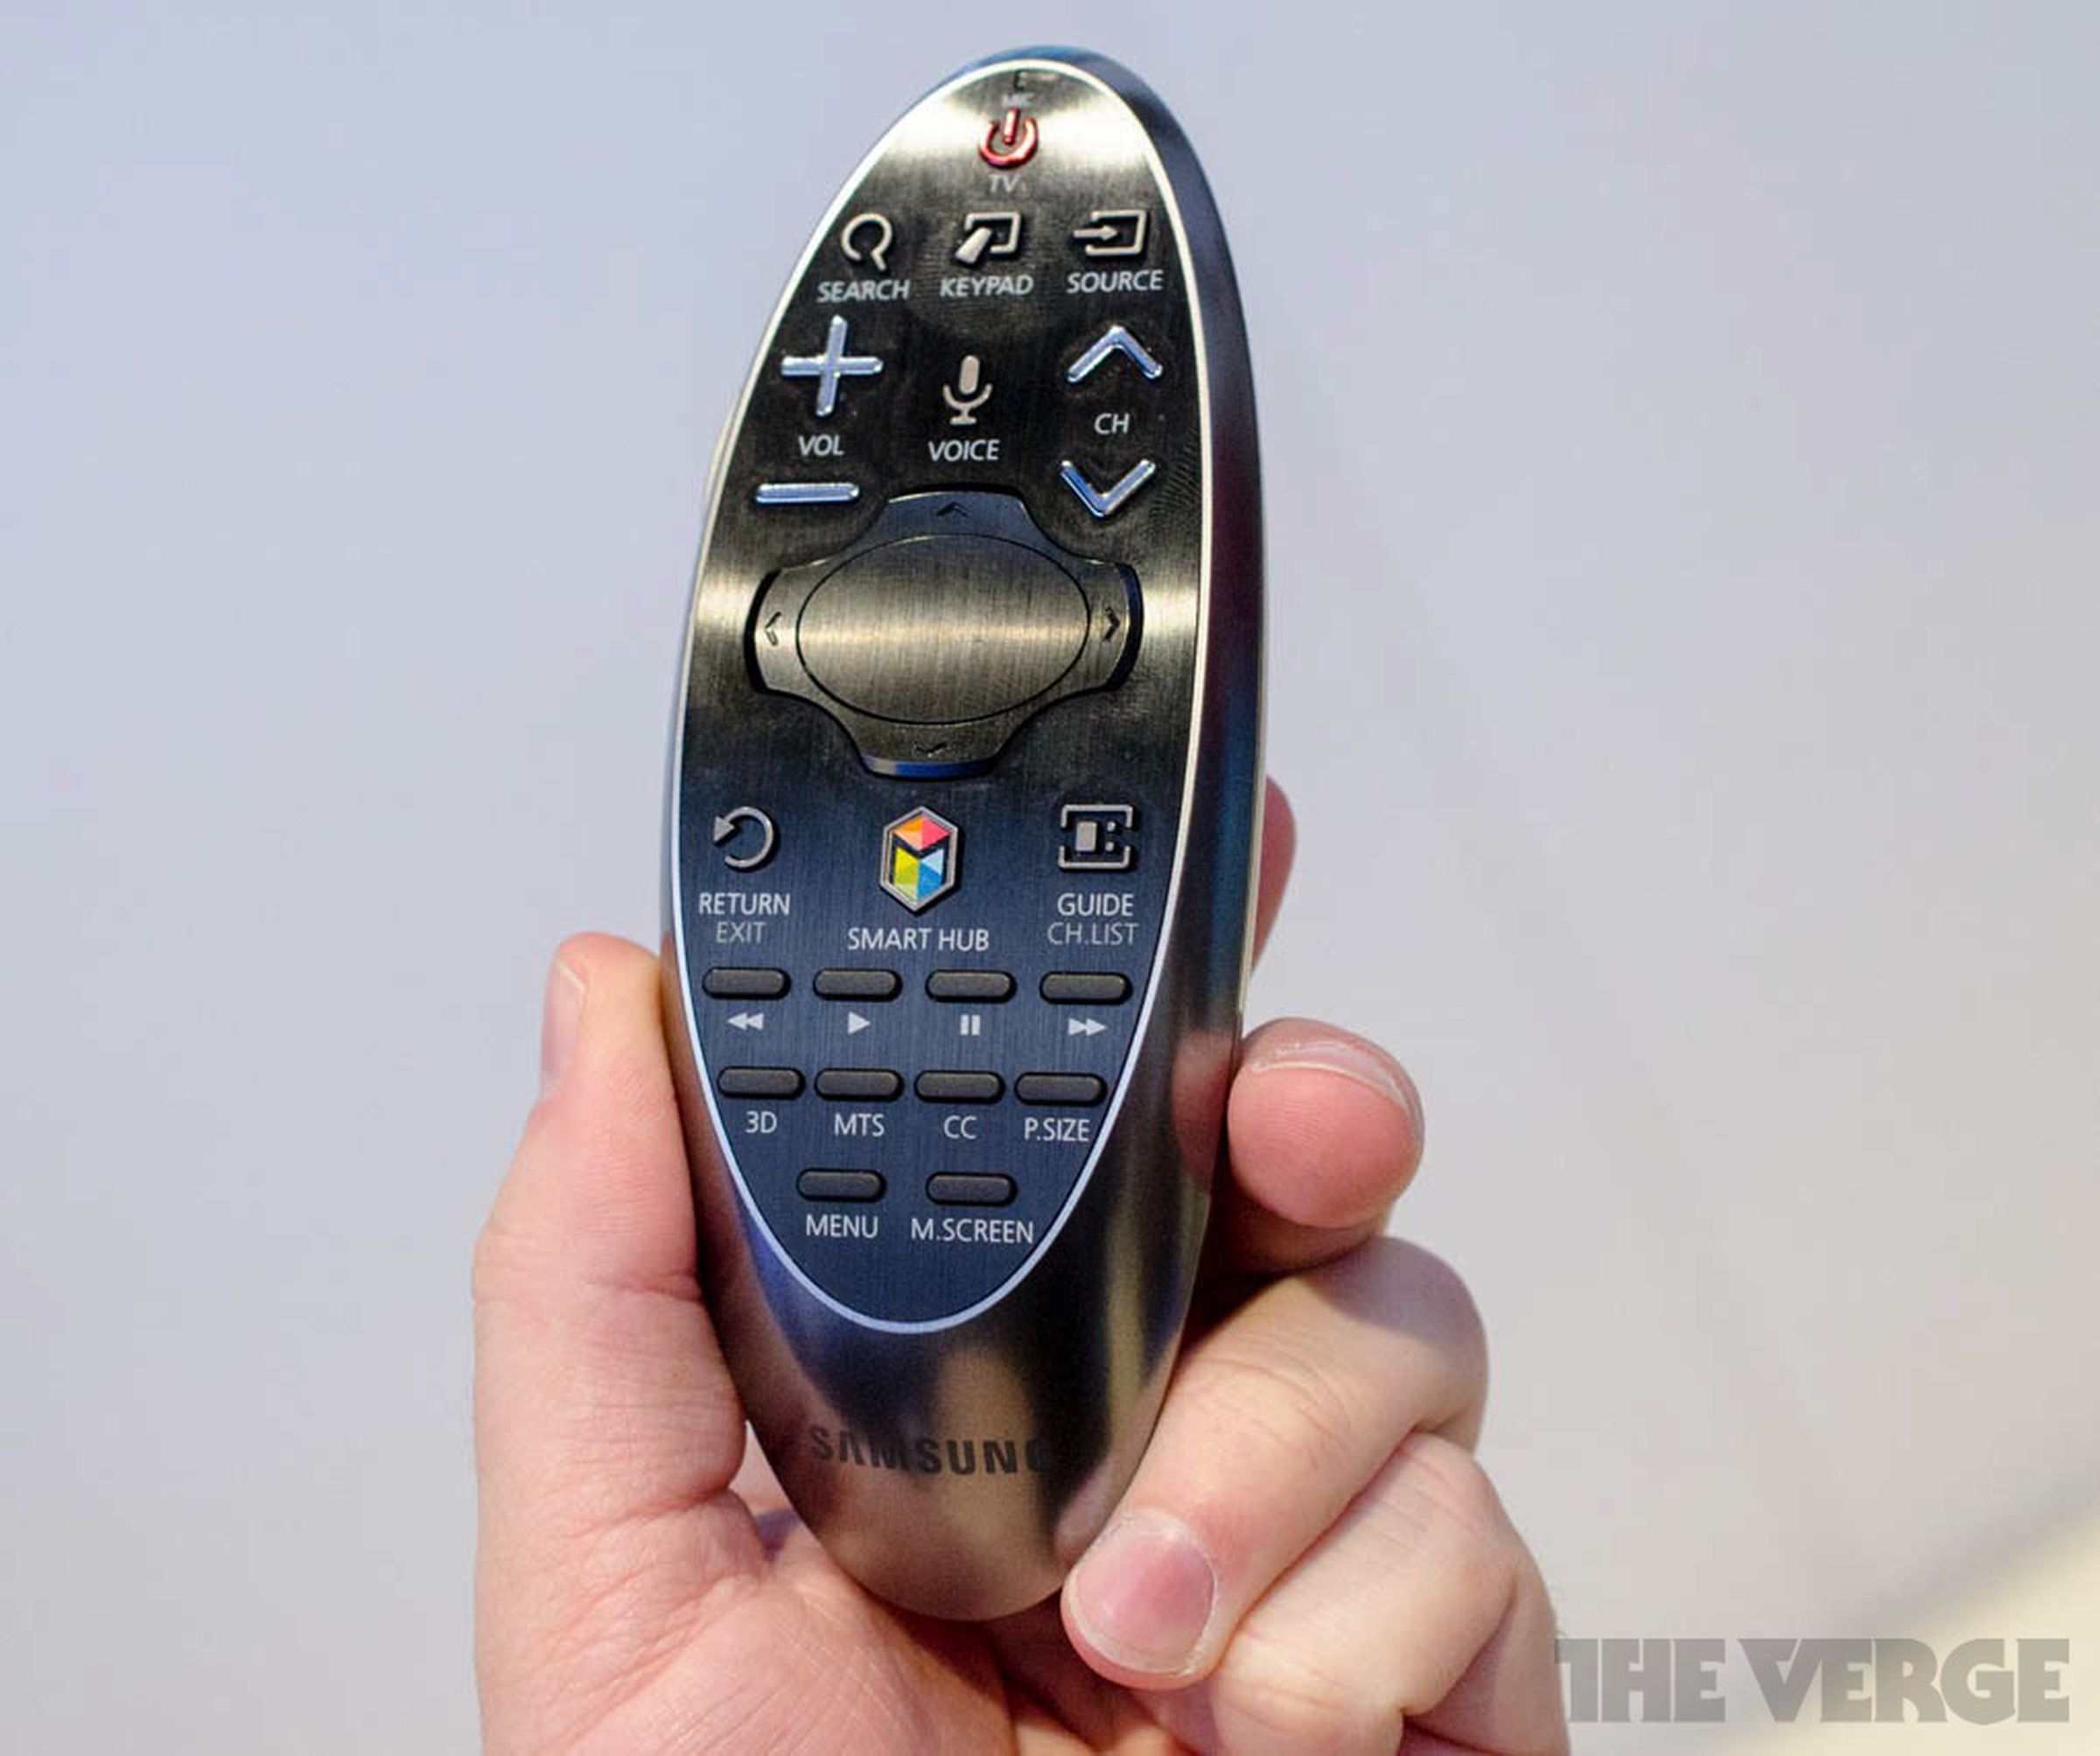 Samsung's new Smart control TV remote with gesture control